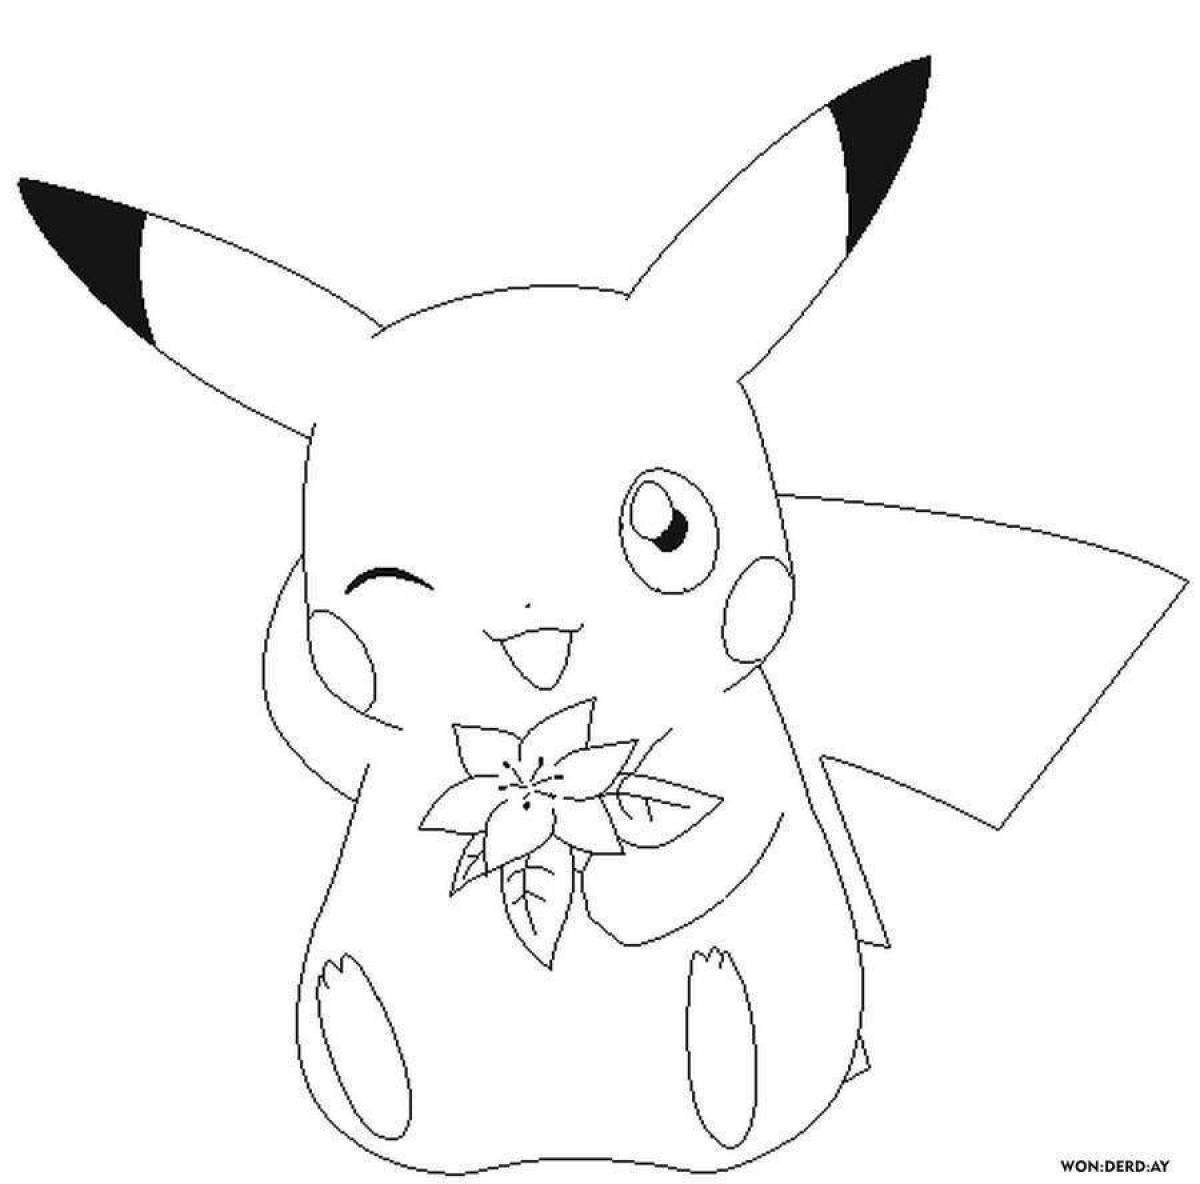 Glowing pikachu coloring page for girls